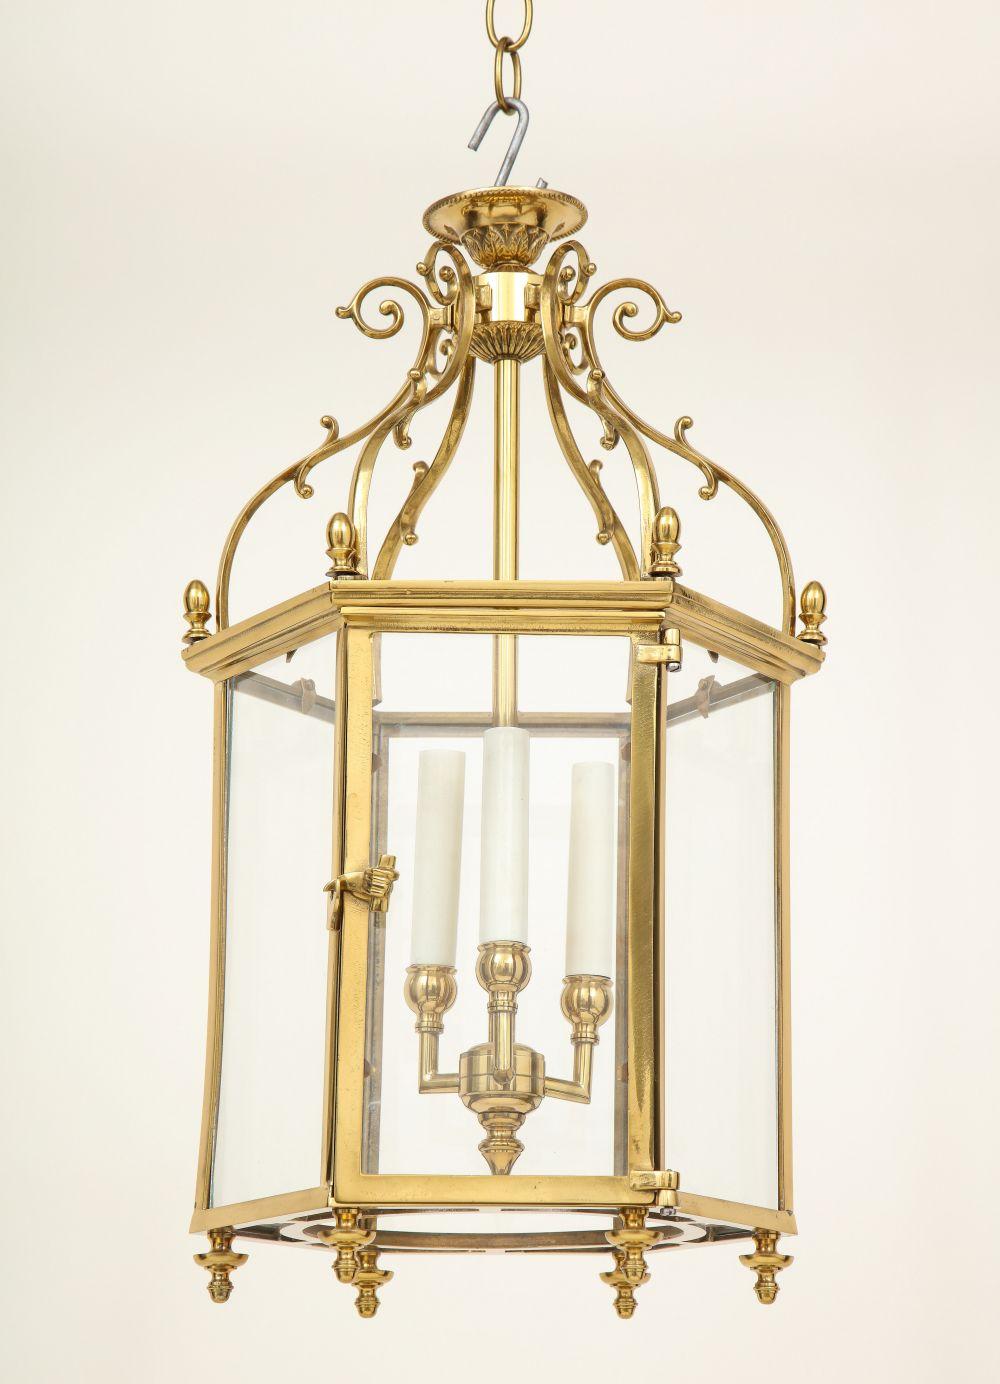 Fitted with four electrified candlelights within the hexagonal glass-inset frame, with volute scroll cresting.